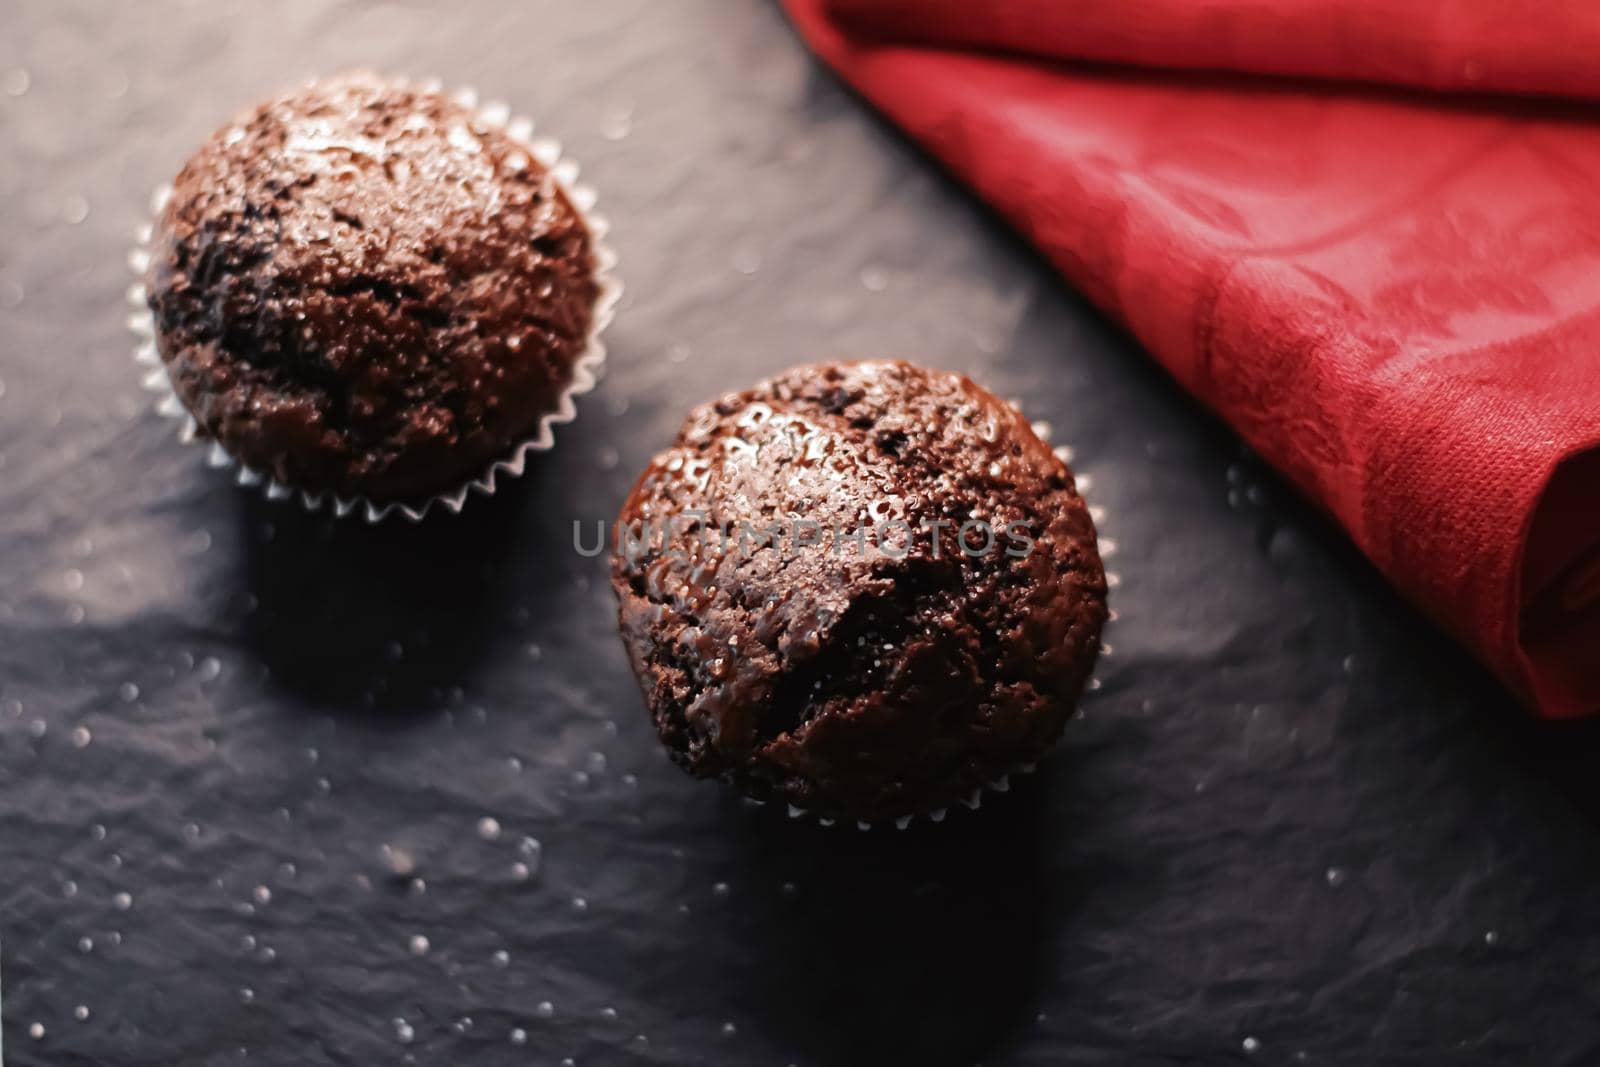 Two chocolate muffins freshly baked at home, homemade comfort food recipe by Anneleven